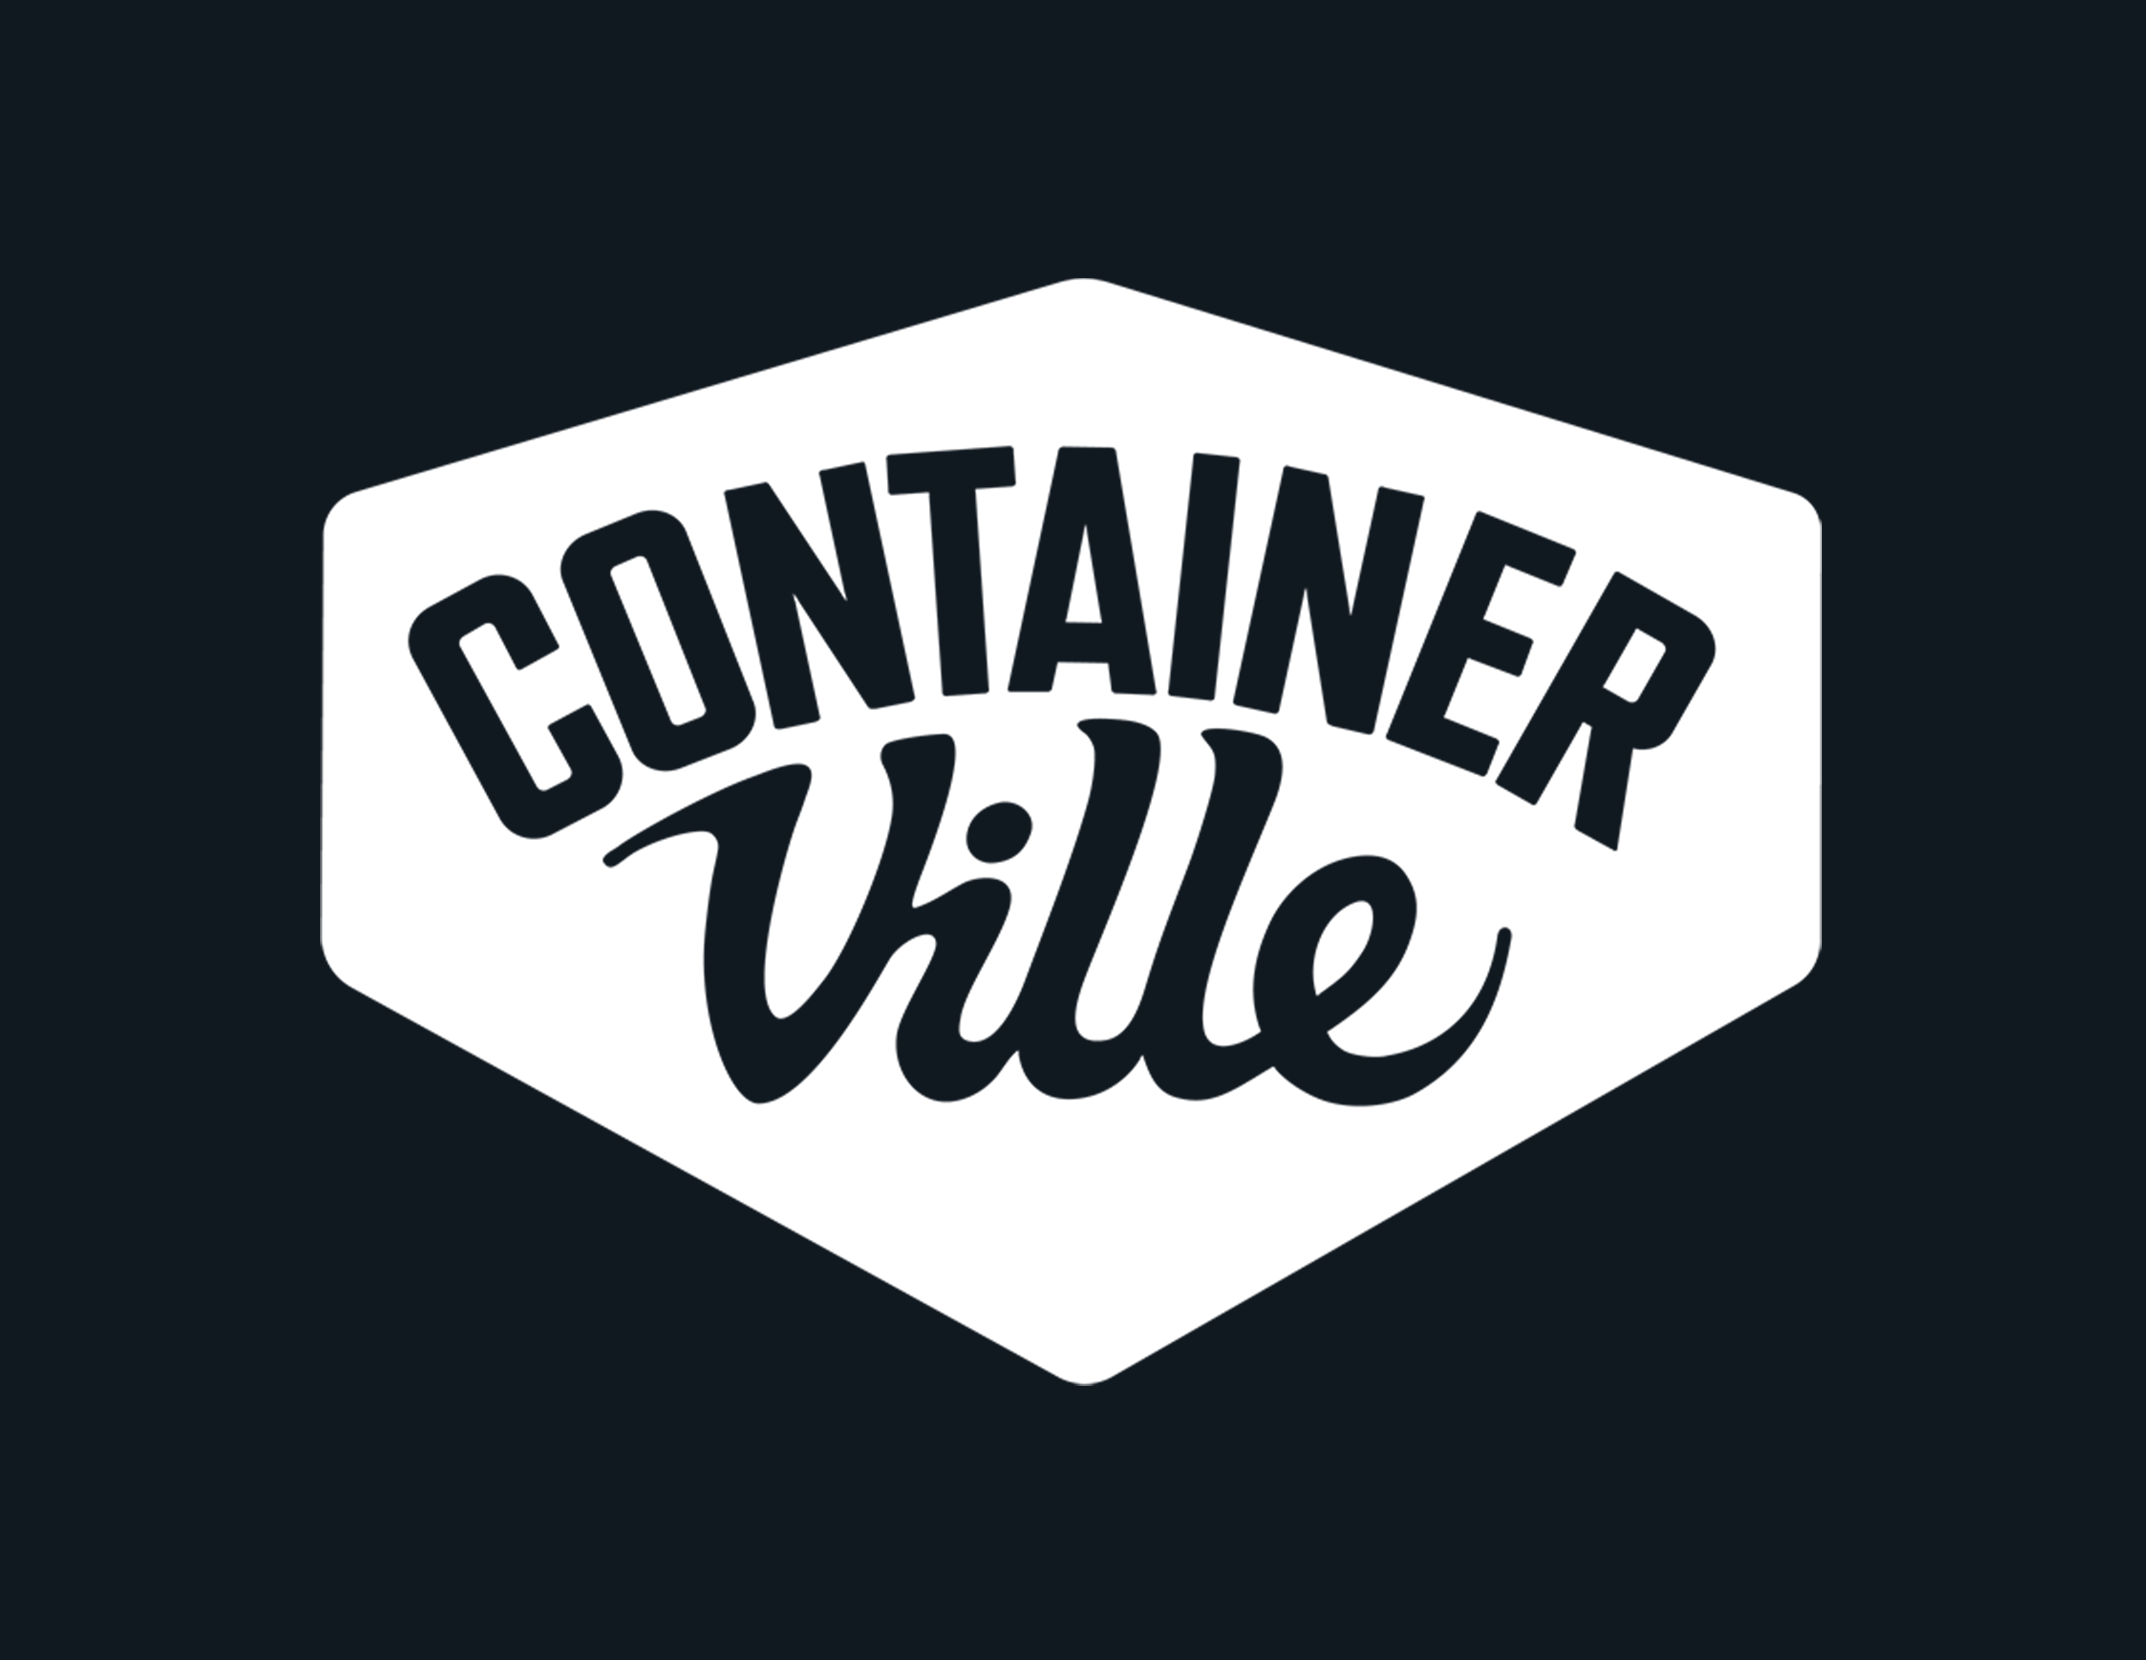 Containerville logo